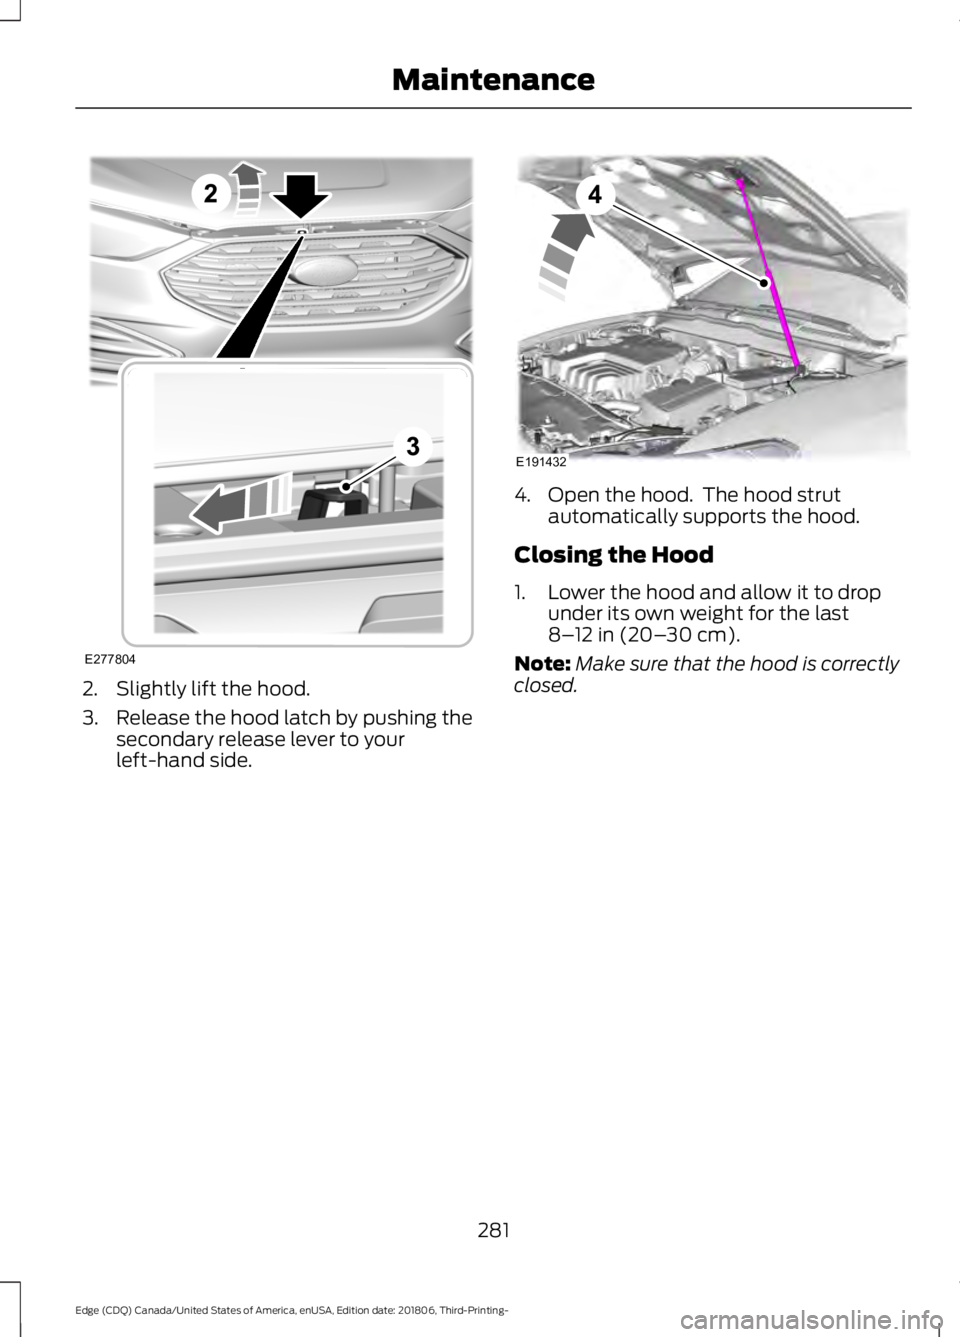 FORD EDGE 2019  Owners Manual 2. Slightly lift the hood.
3. Release the hood latch by pushing the
secondary release lever to your
left-hand side. 4. Open the hood.  The hood strut
automatically supports the hood.
Closing the Hood
